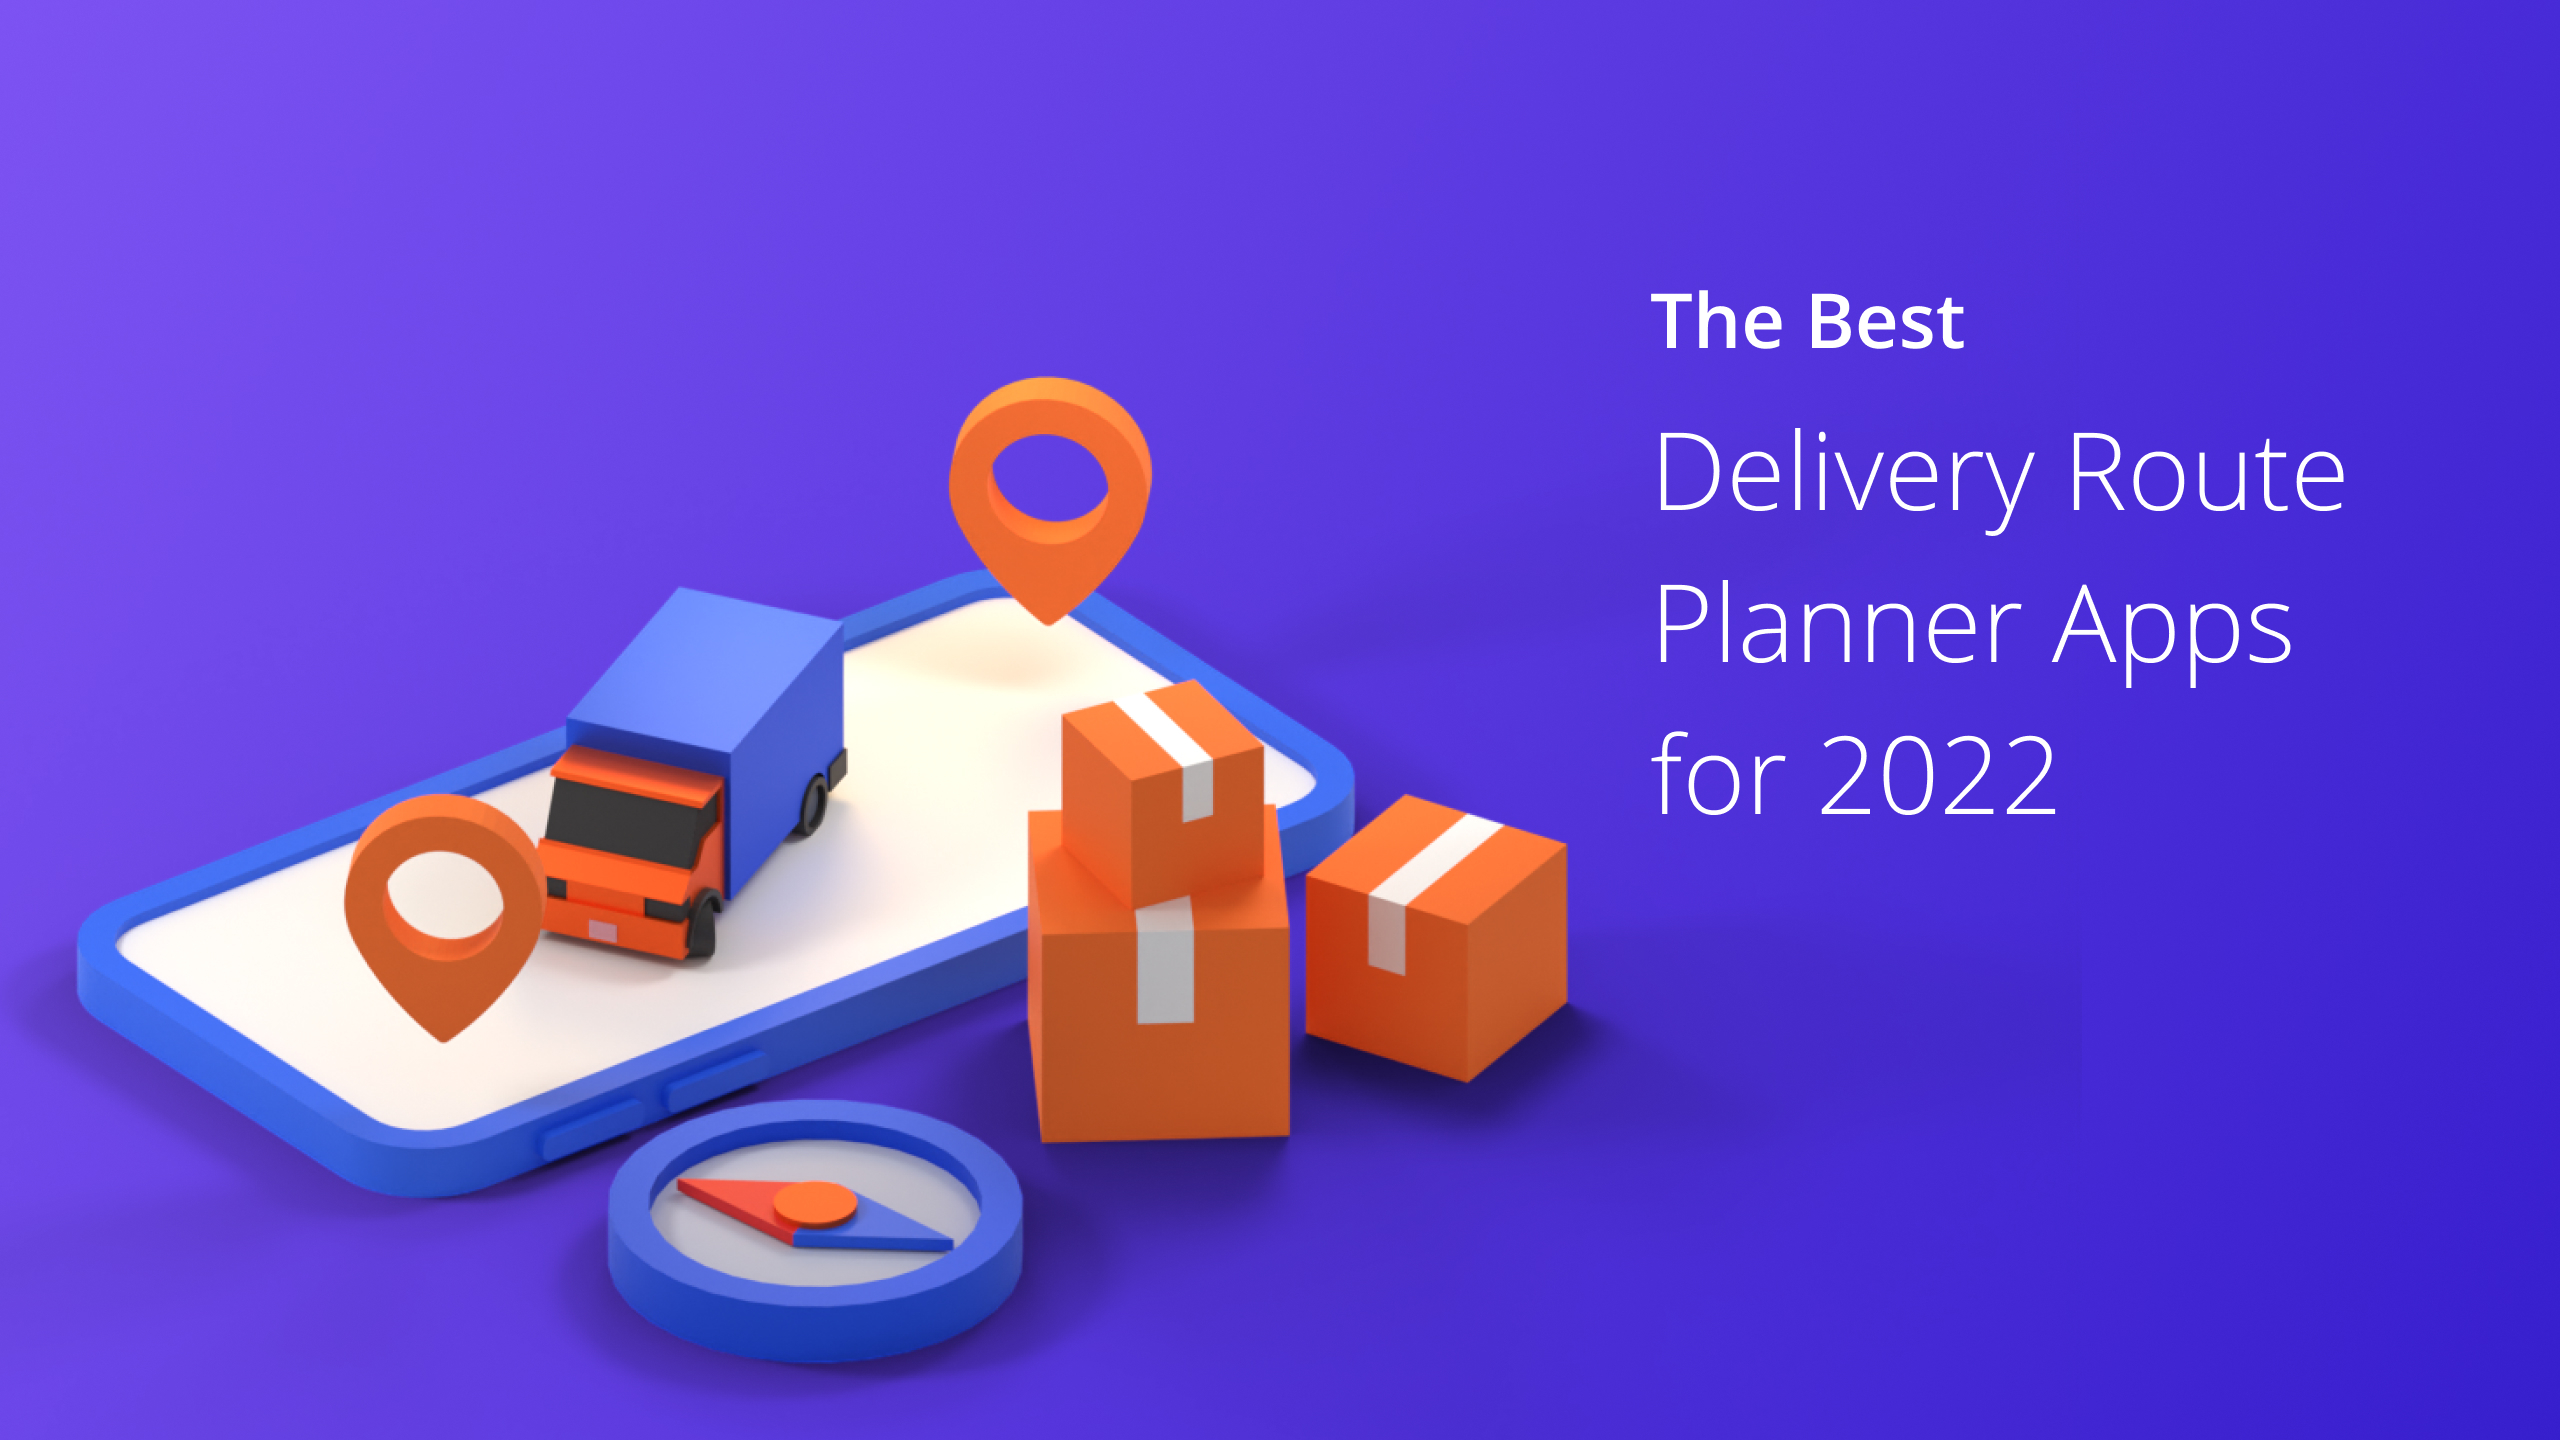 The Best Delivery Route Planner Apps for 2022